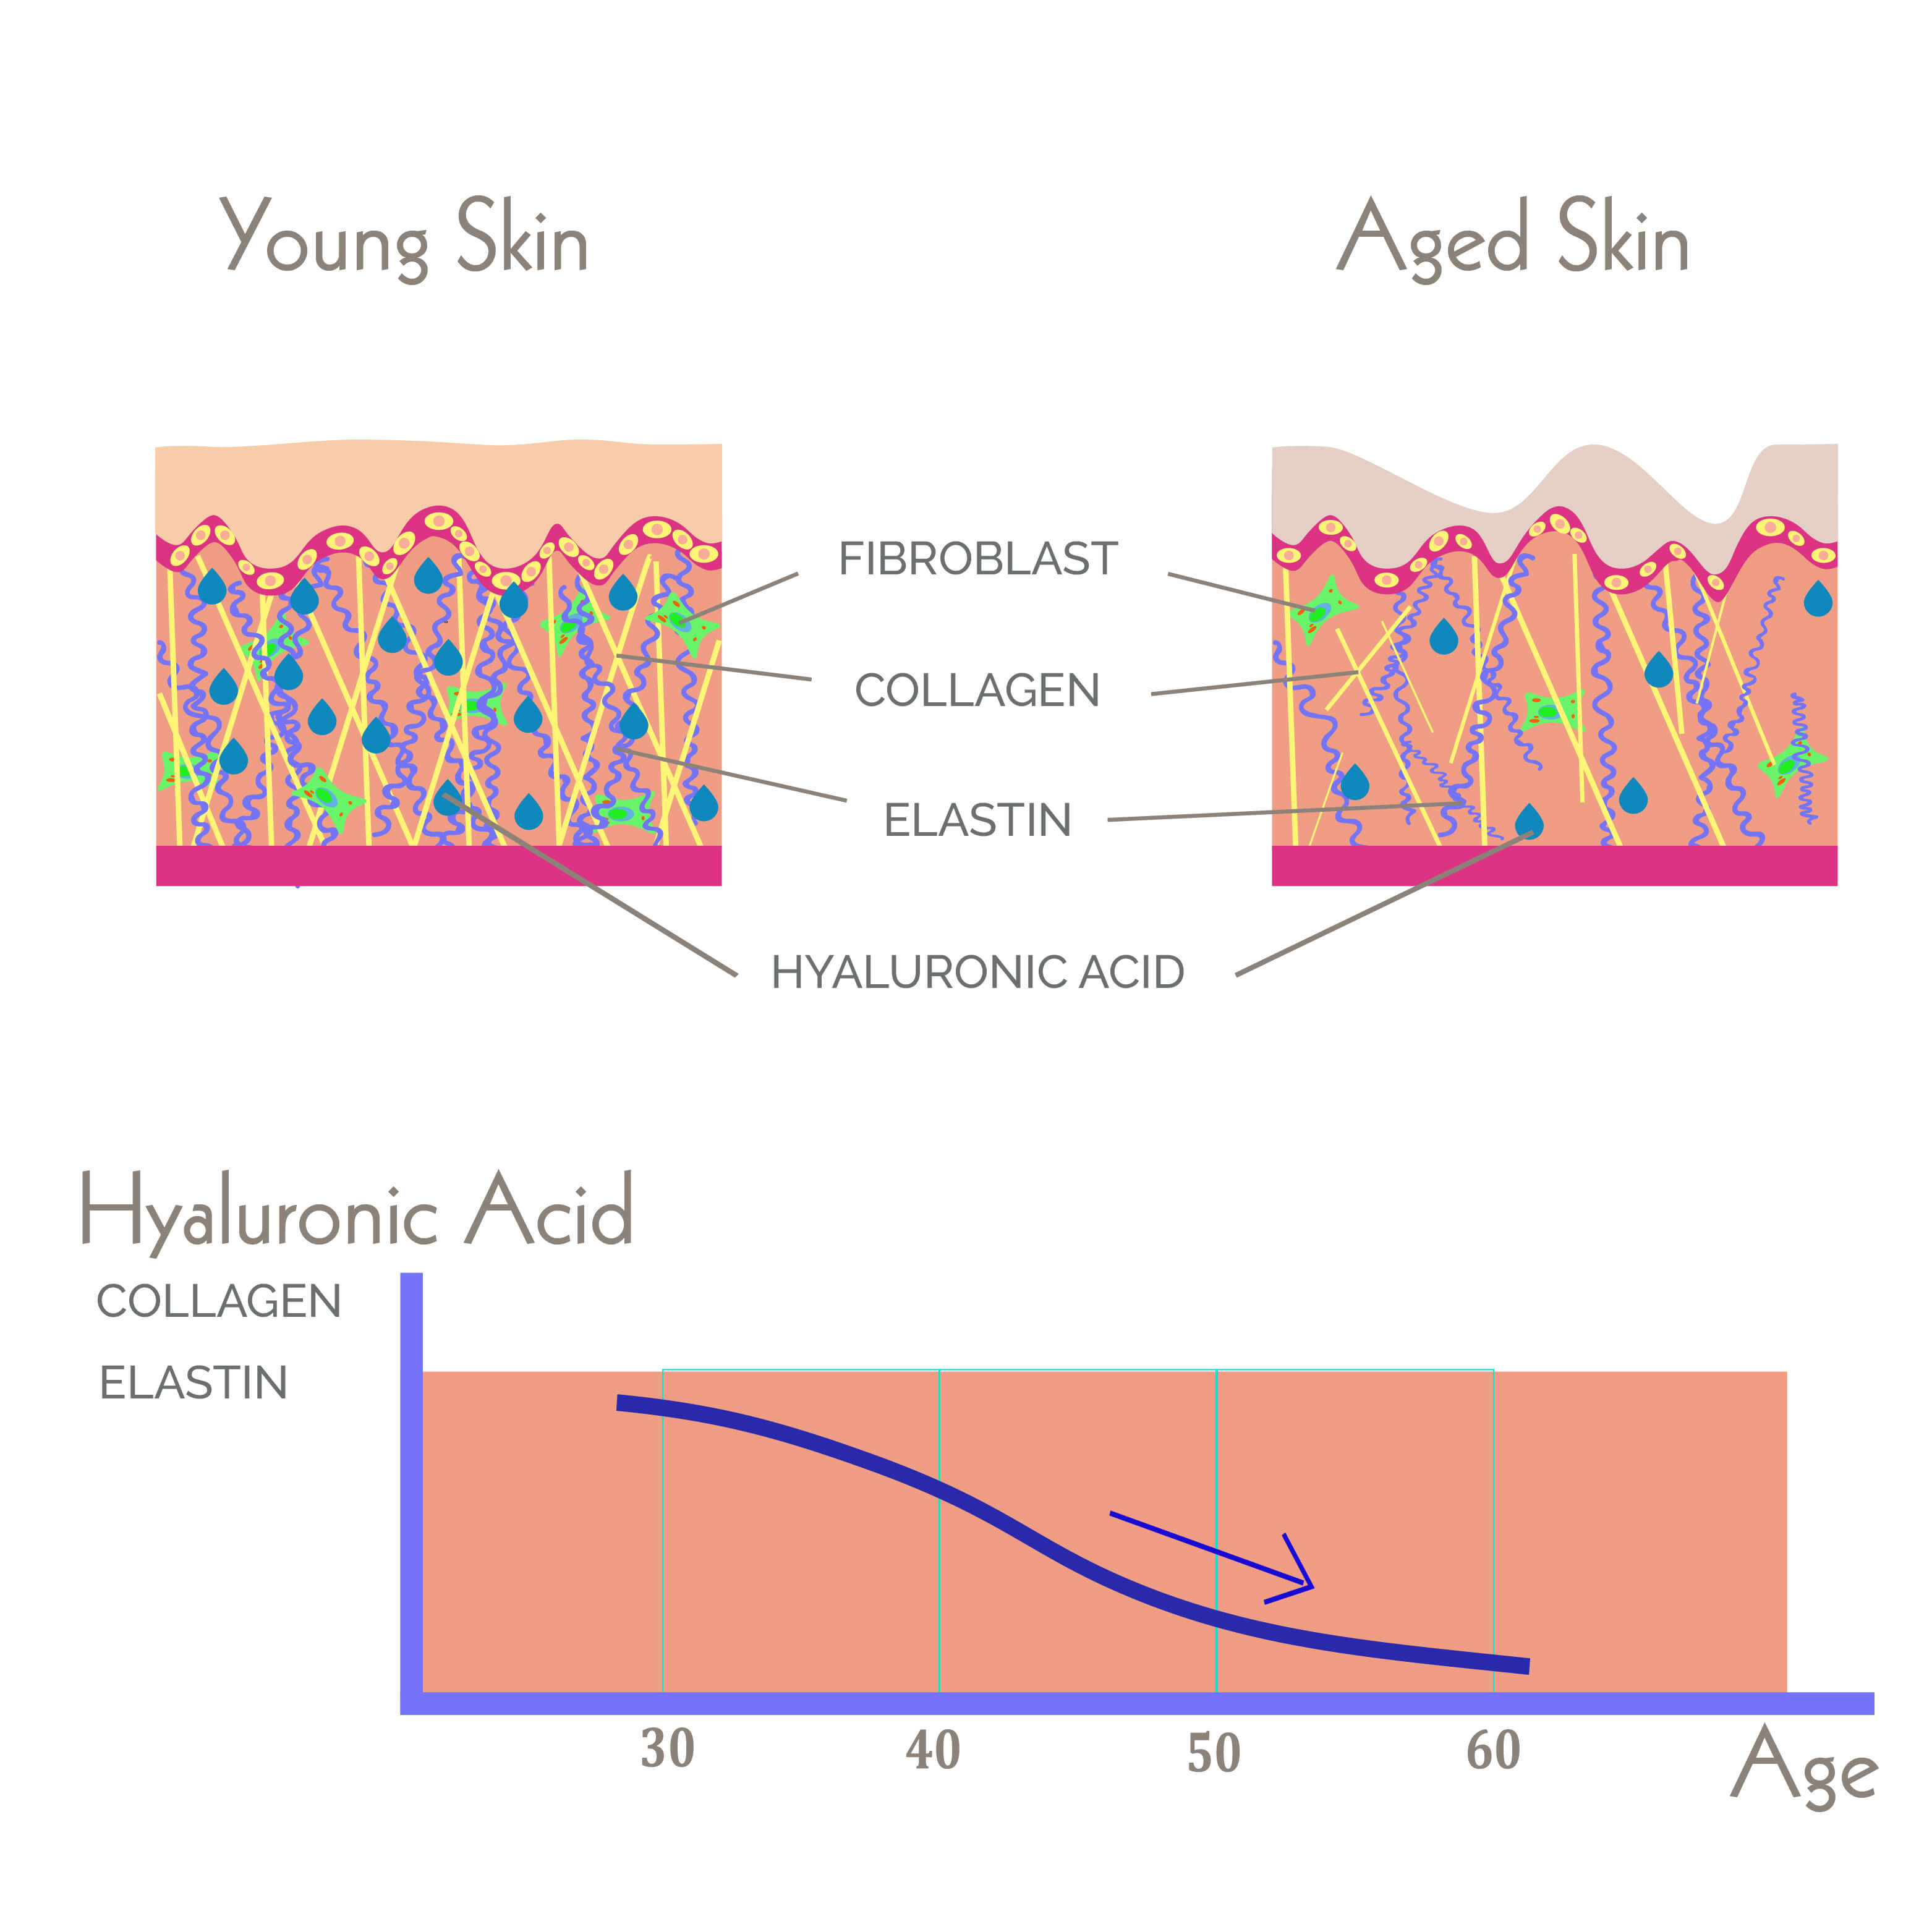 Illustration of young versus aged skin, with hyaluronic acid, collagen and elastin content